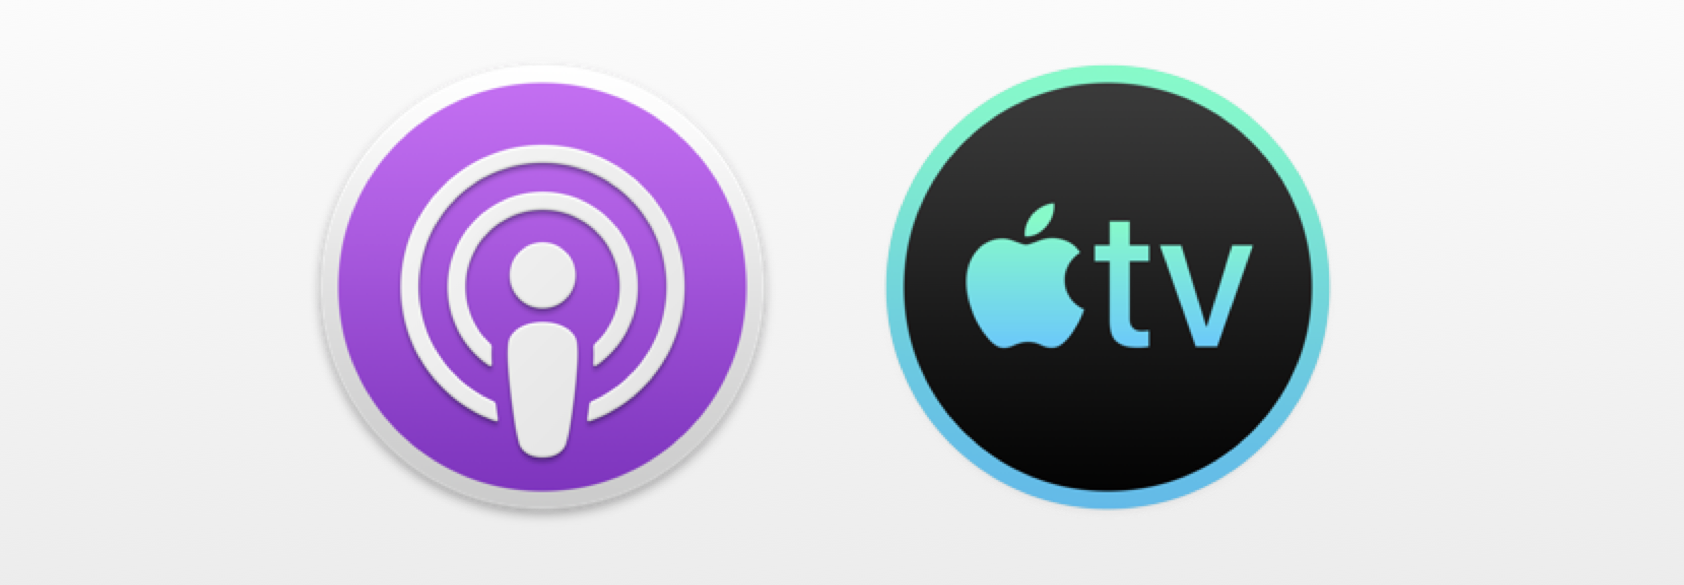 macOS-10.15-Podcasts-TV-app-icons